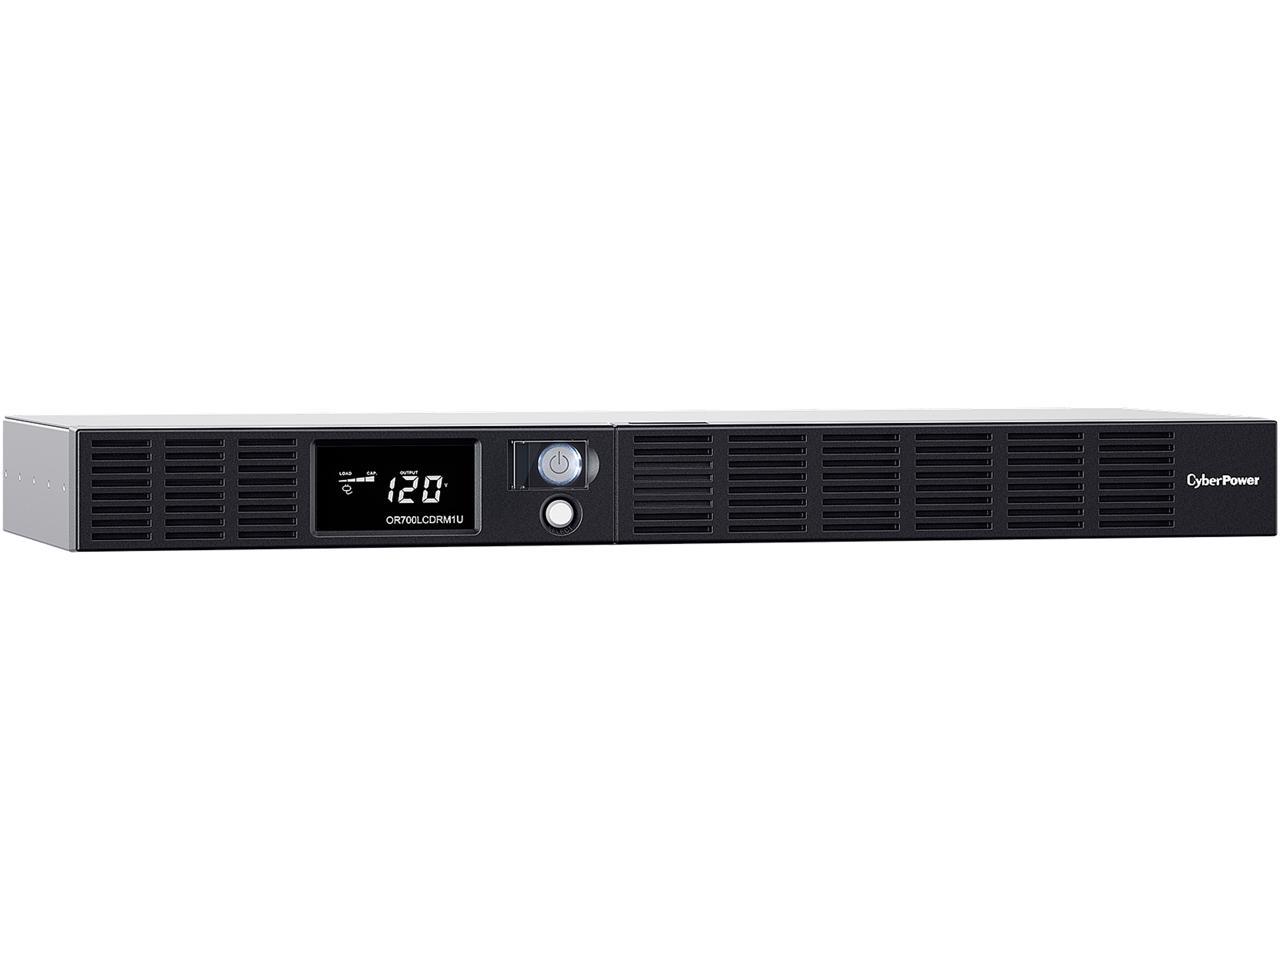 UPS CYBERPOWER | OR700LCDRM1U RT